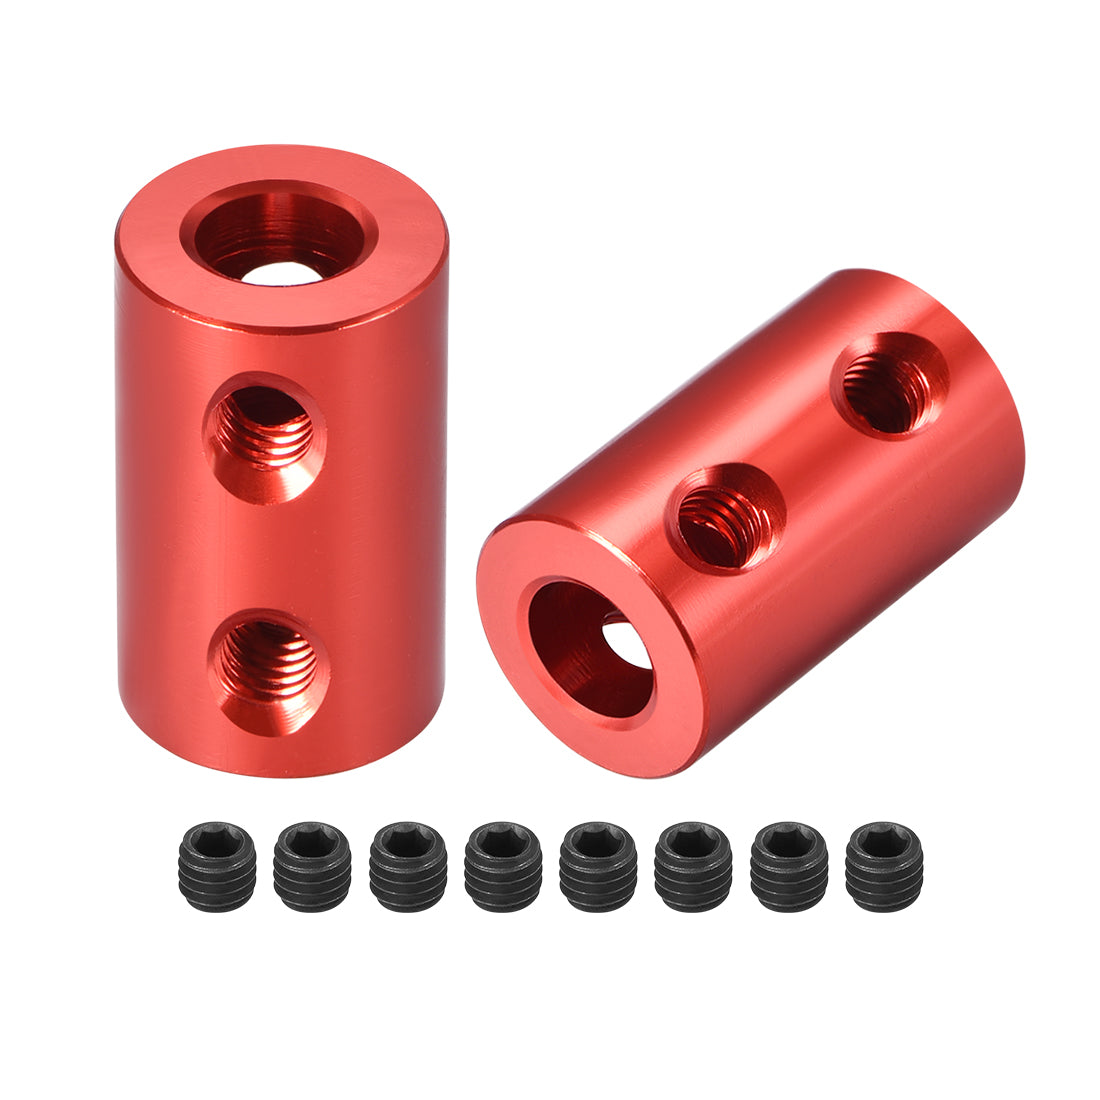 uxcell Uxcell Shaft Coupling 6mm to 6mm Bore L20xD12 Robot Motor Wheel Rigid Coupler Connector Red 2 PCS